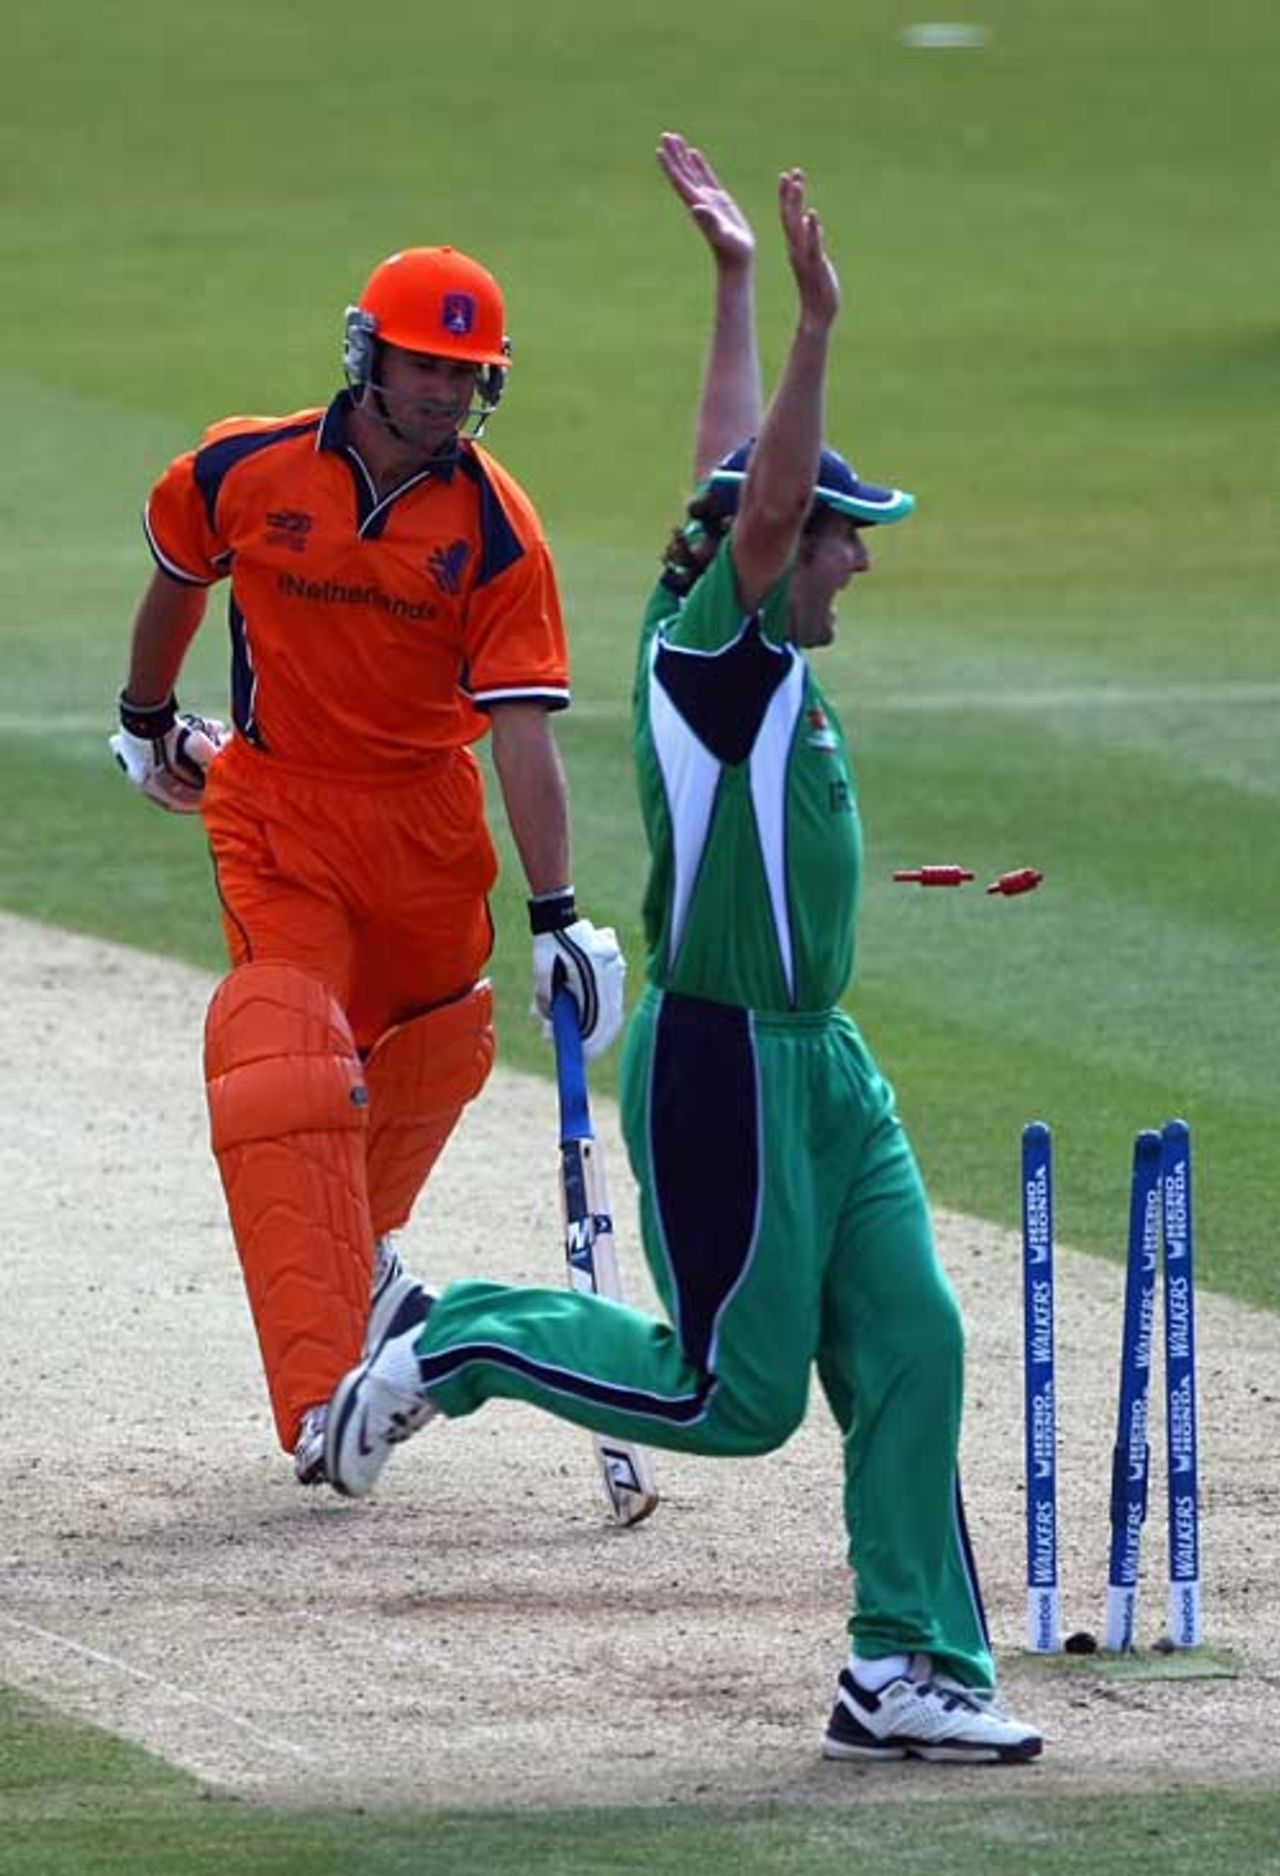 Ryan ten Doeschate is run out during the Super Over, Ireland v Netherlands, ICC World Twenty20 warm-up match, Lord's, June 1, 2009